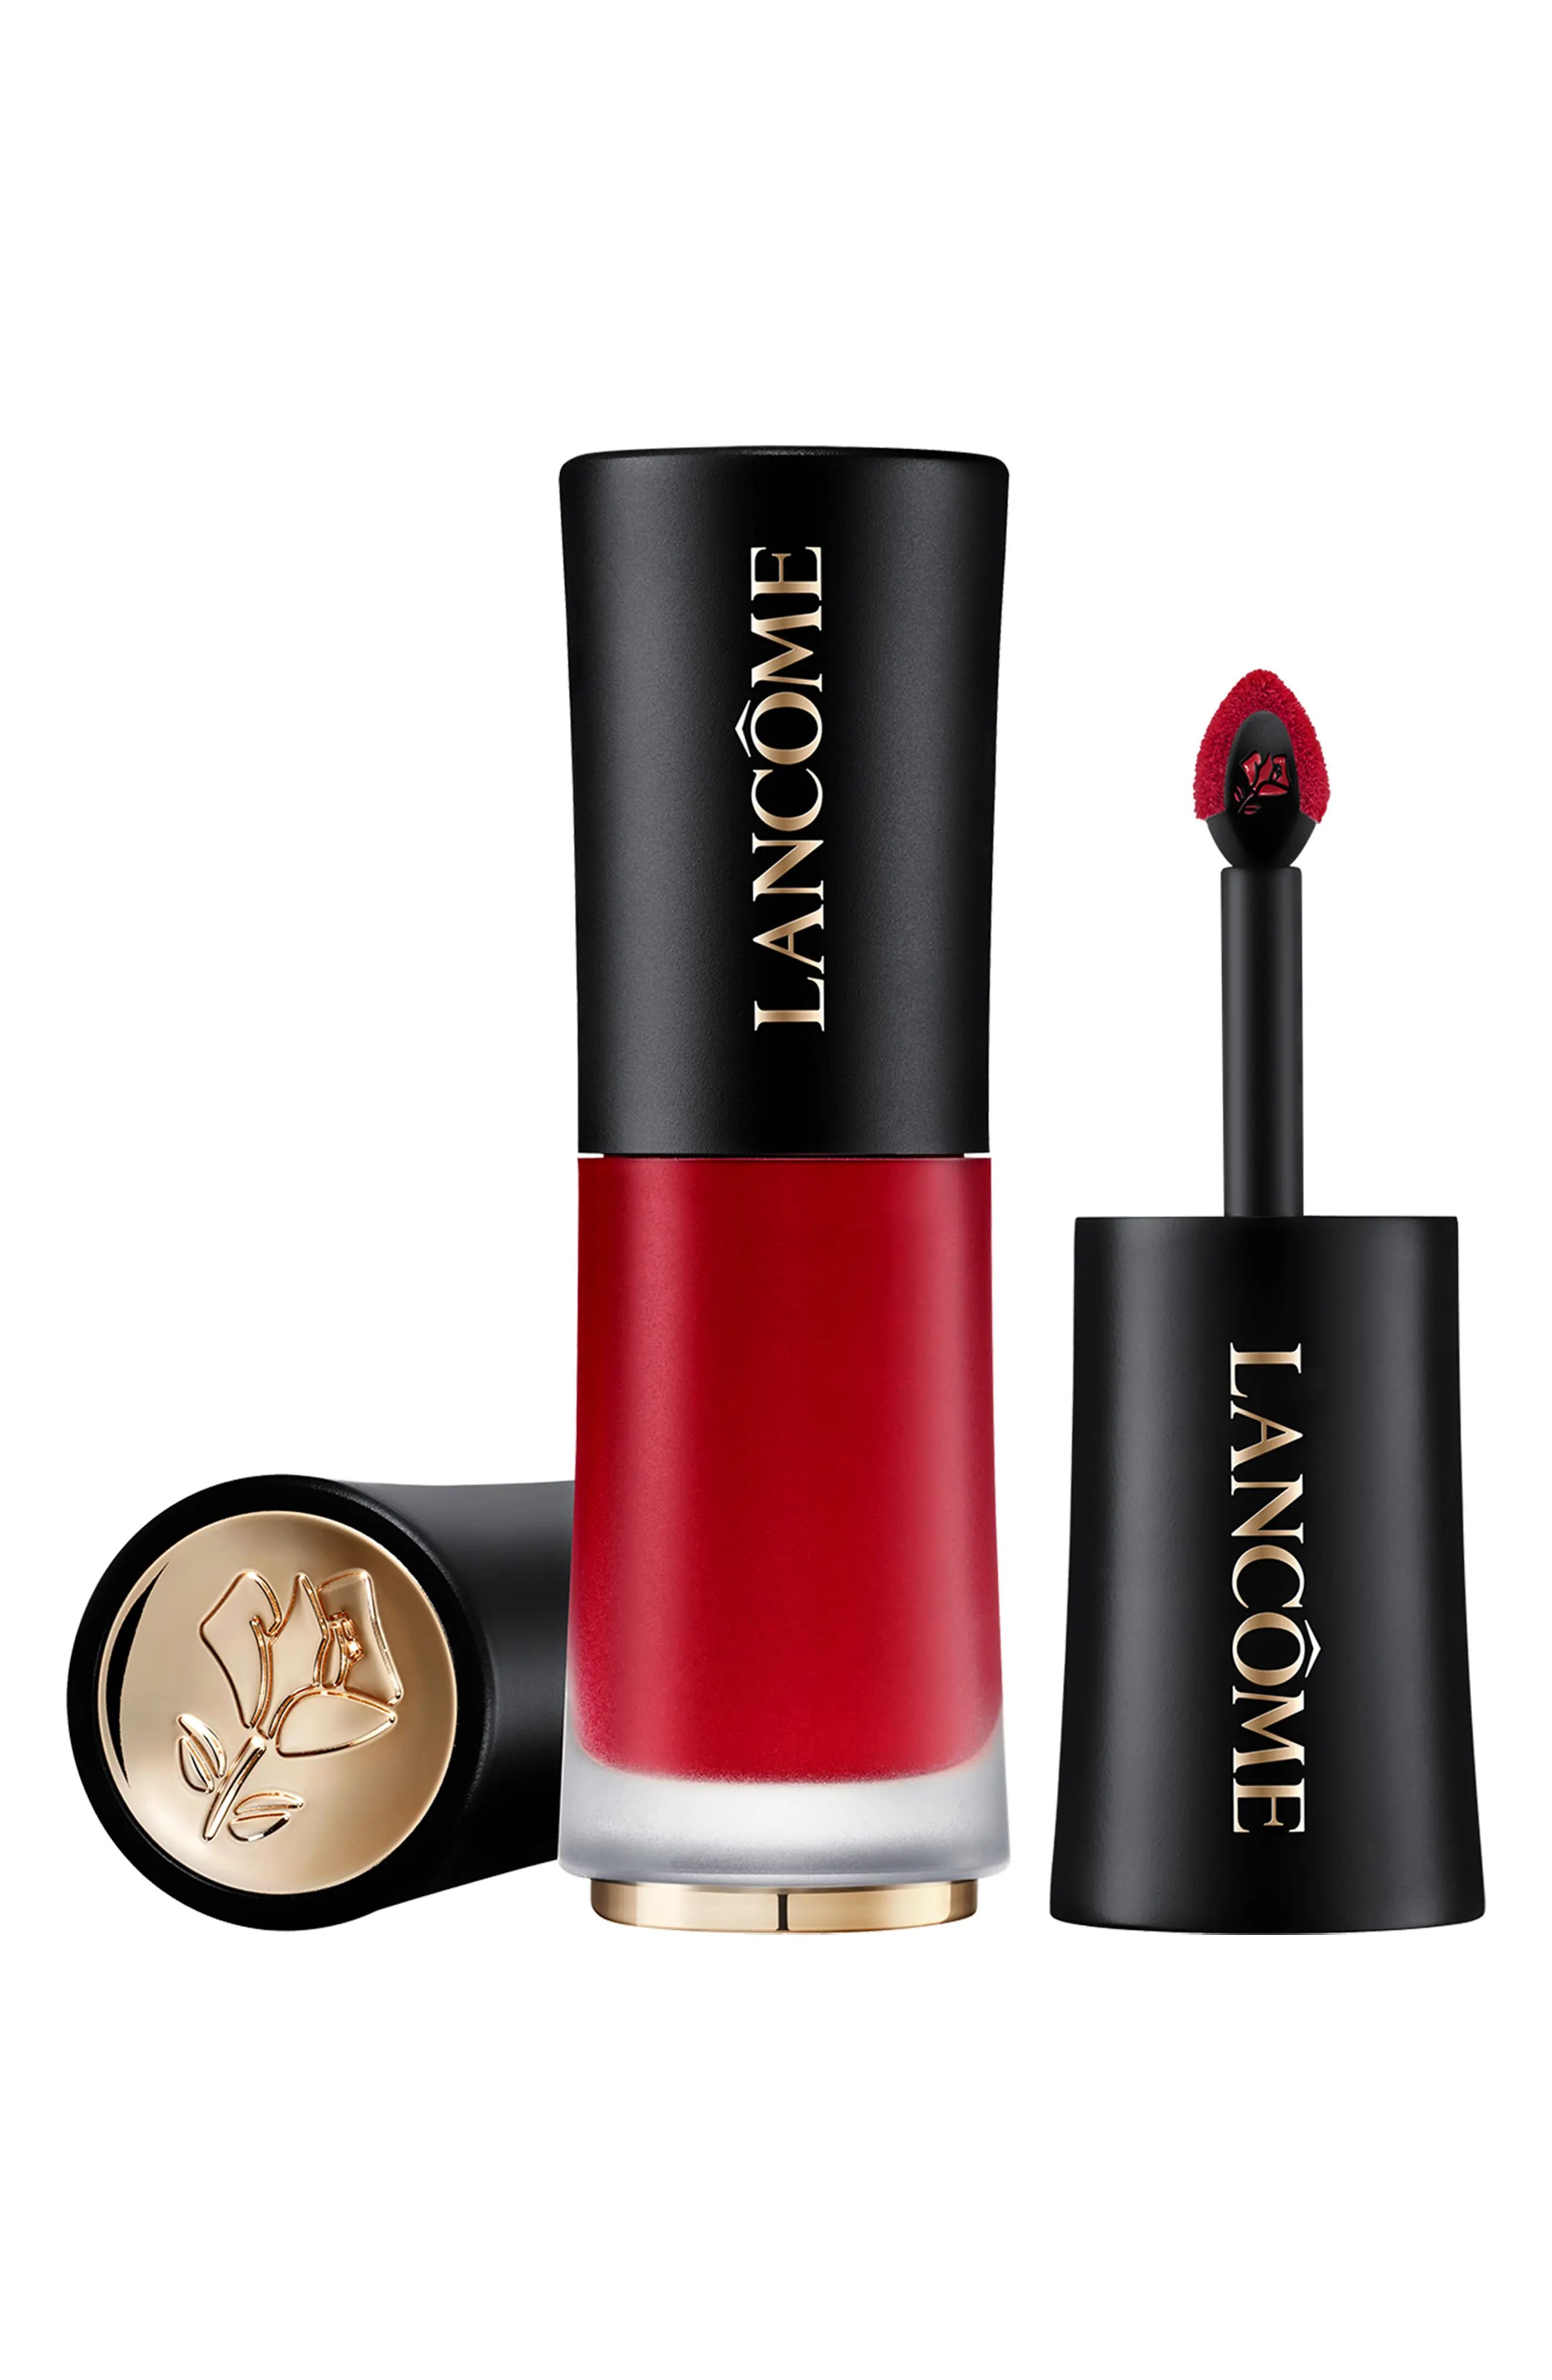 Lancome L'Absolu Rouge Drama Ink Liquid Lipstick in 525 French Bisou at Nordstrom | Nordstrom